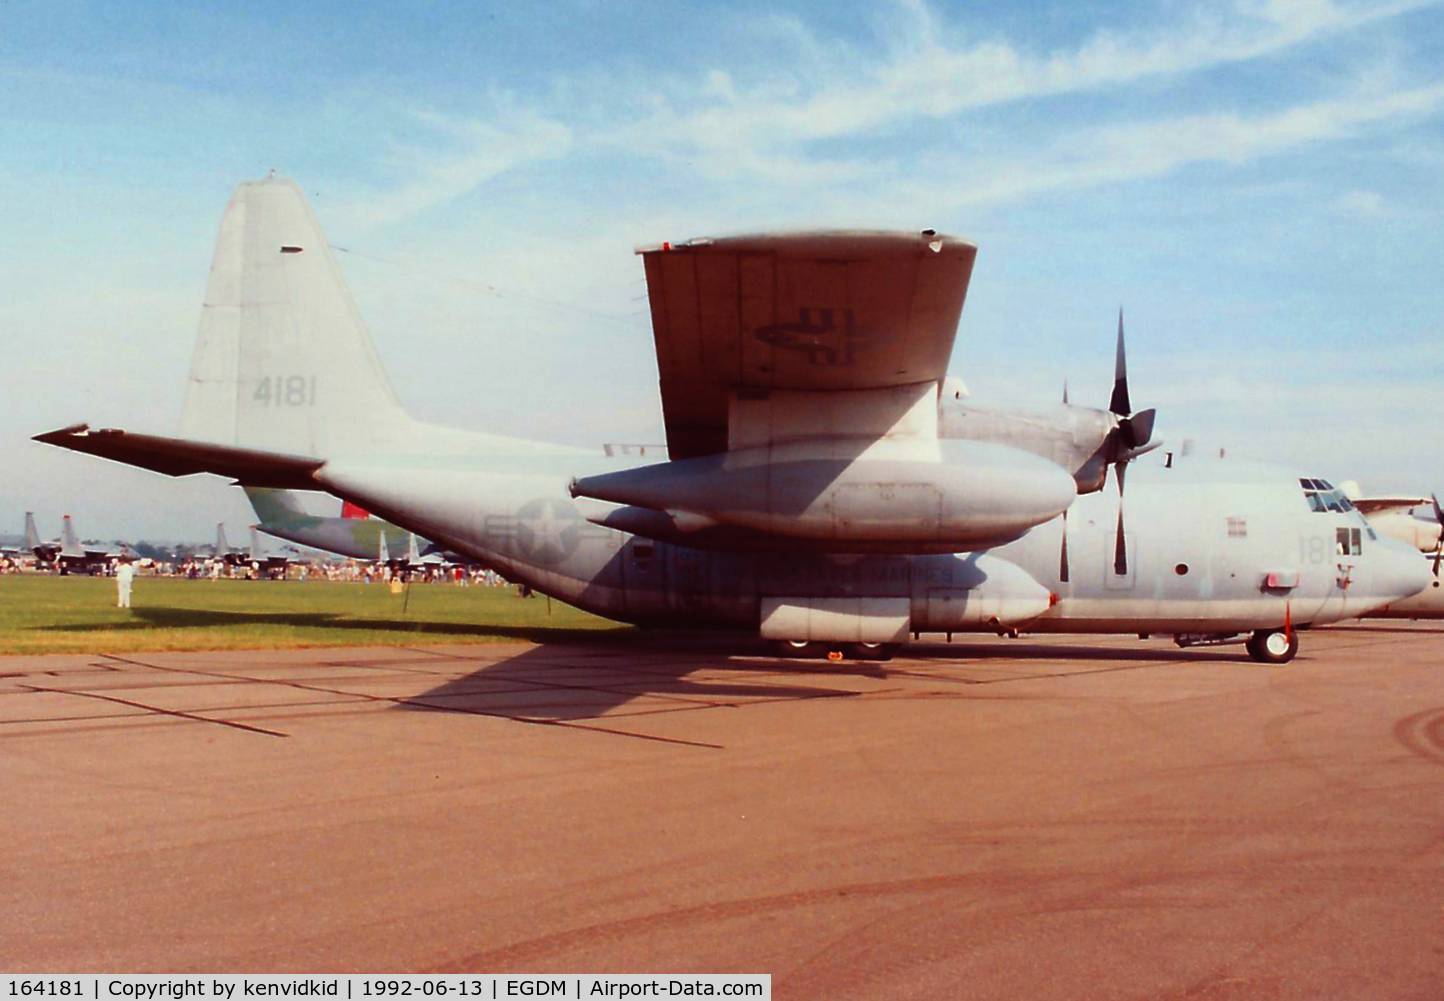 164181, 1988 Lockheed KC-130T Hercules C/N 382-5176, At Boscombe Down, scanned from print.